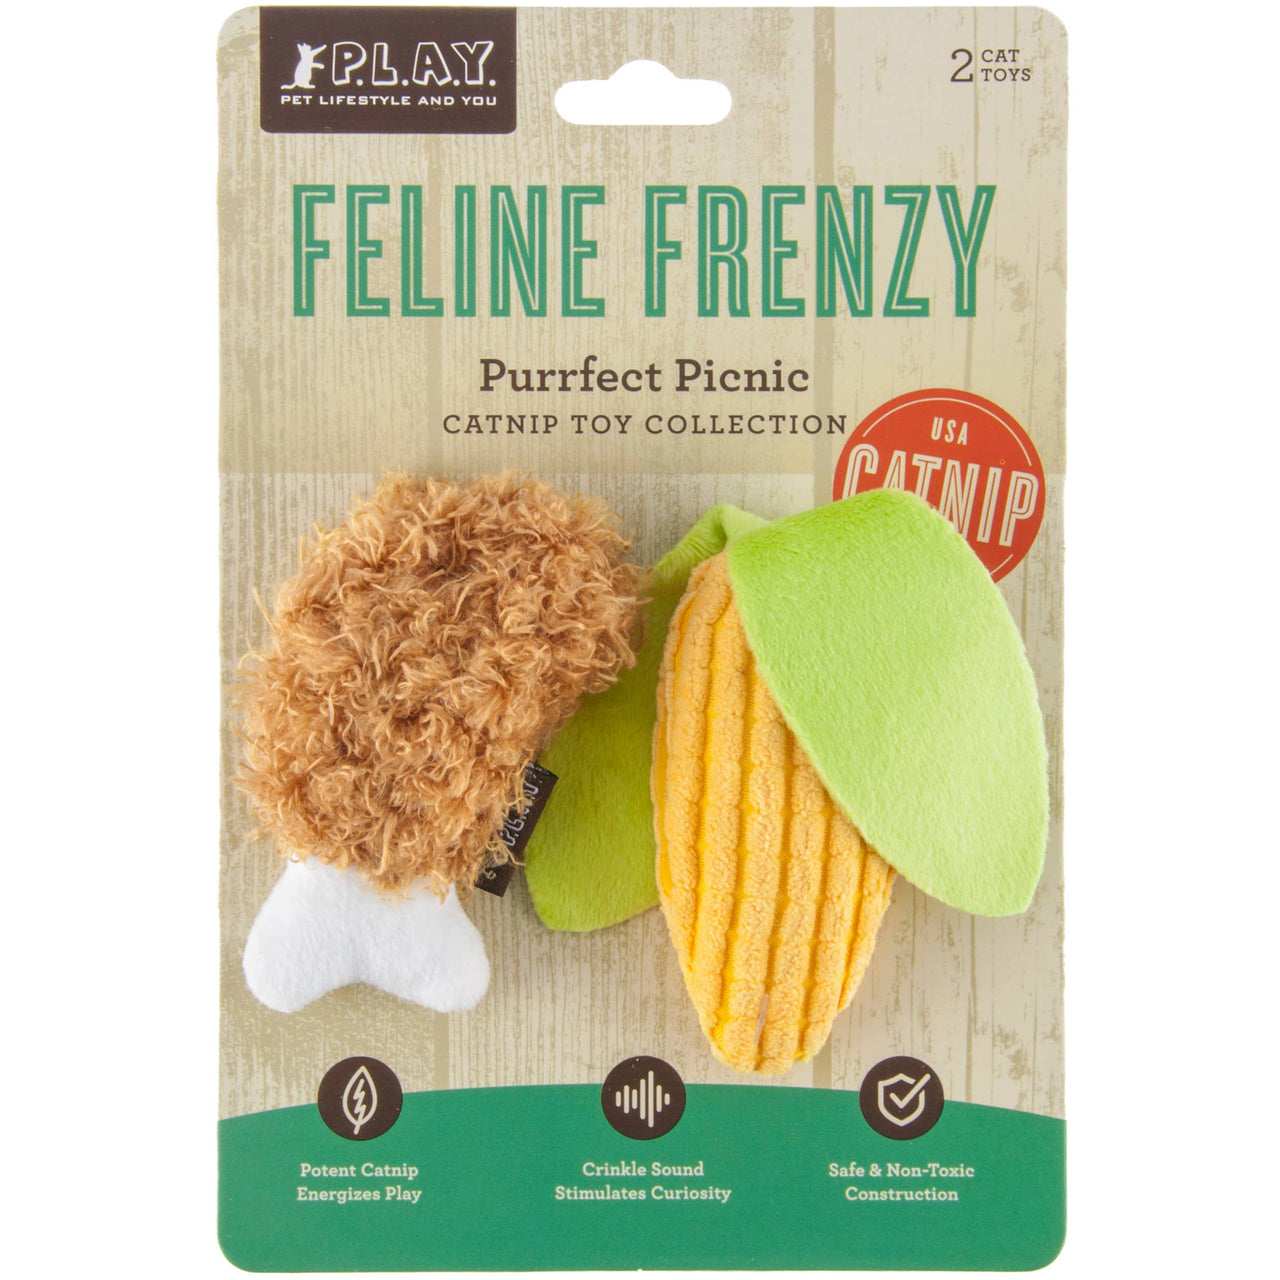 All Feline Frenzy Cat Collection  P.L.A.Y. Pet Lifestyle and You   